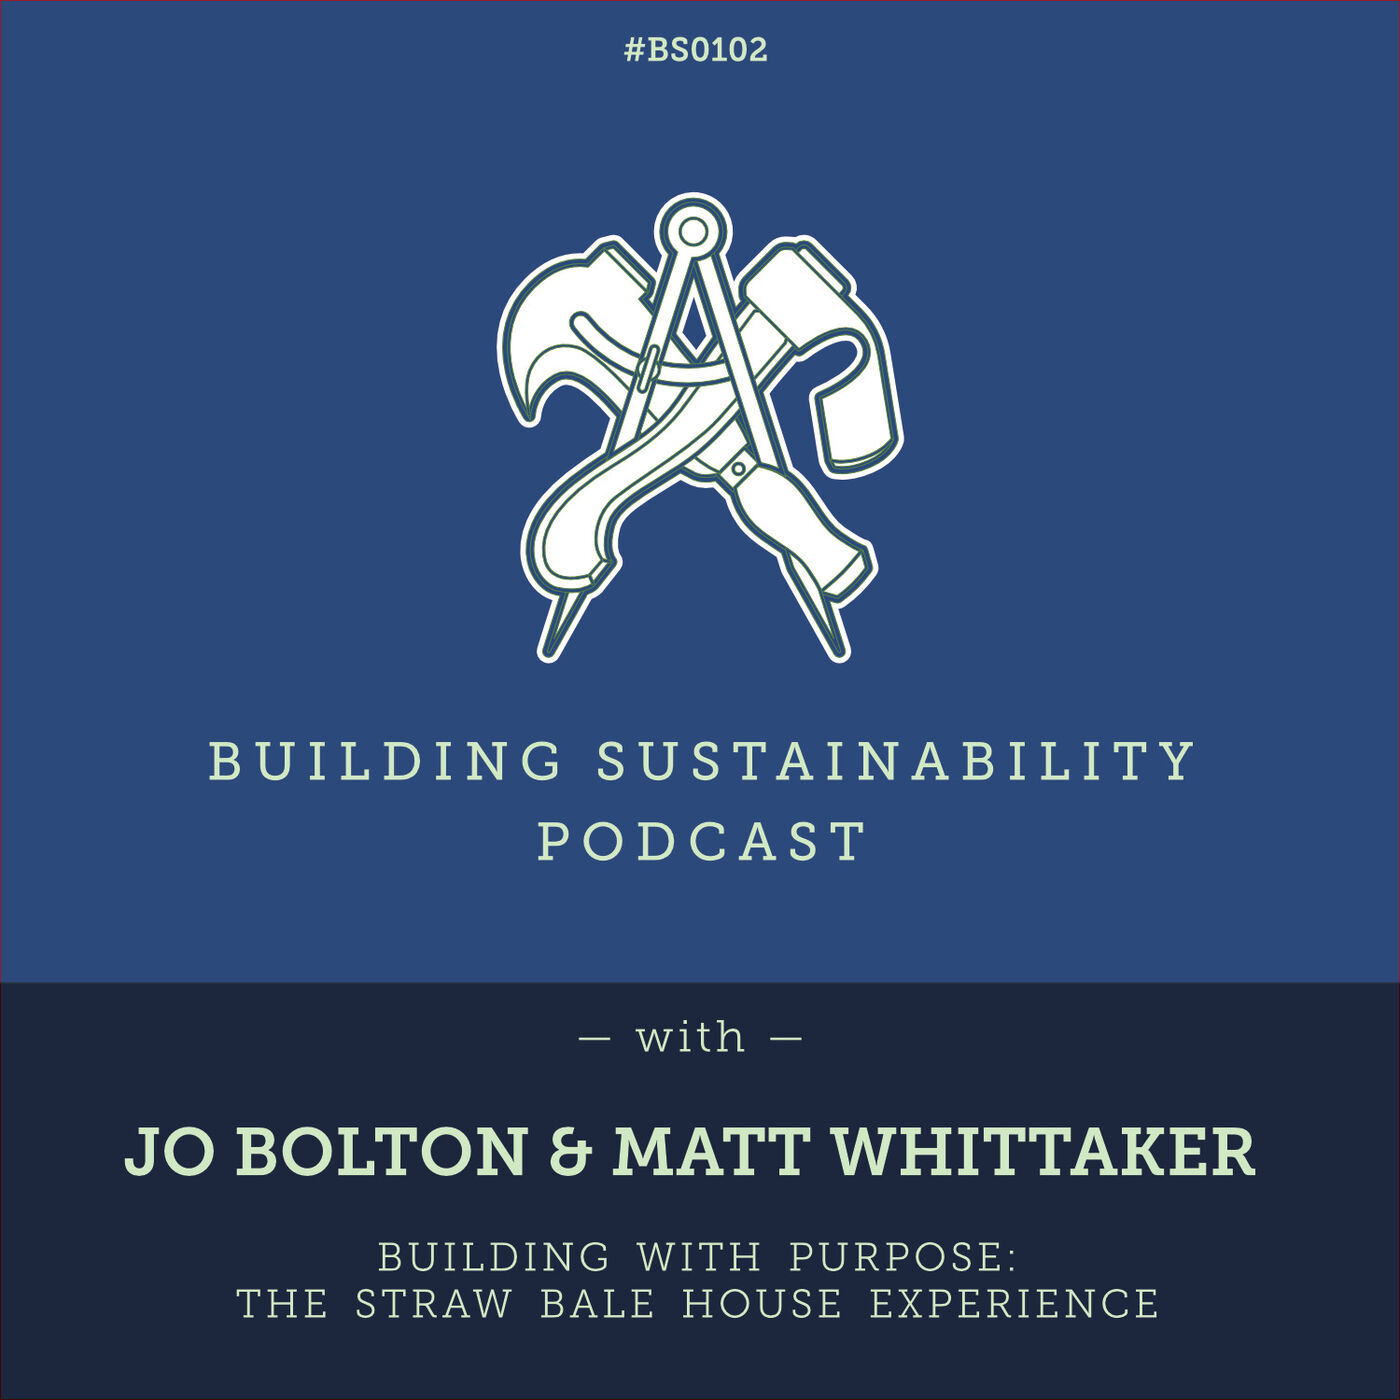 Building with Purpose: The Straw Bale House Experience - Jo Bolton & Matt Whitaker - BS102